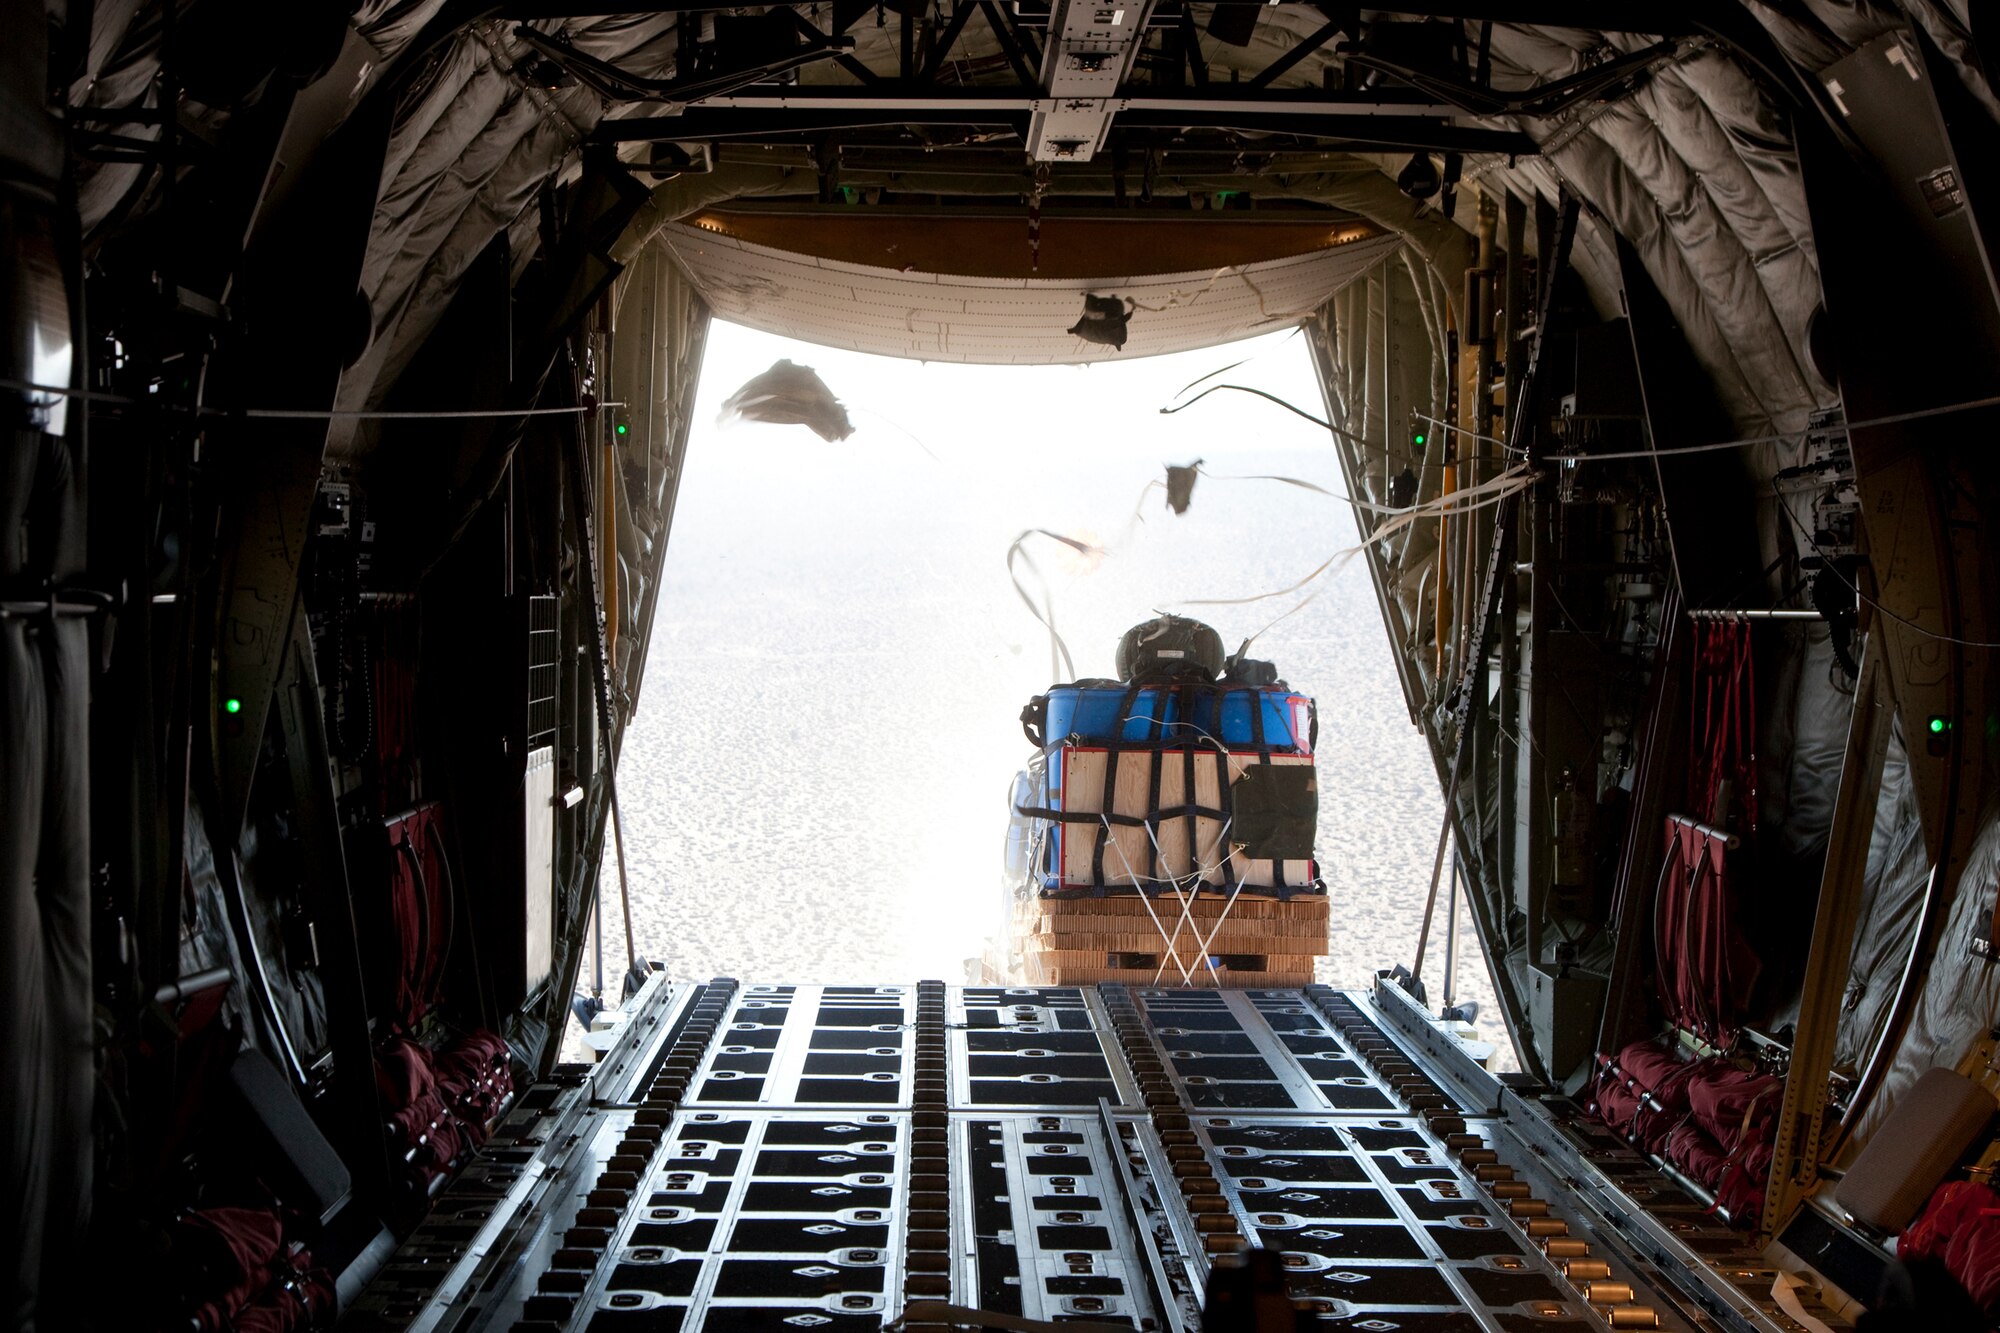 The last test container bundle in a string of seven bundles exits a C-130J during a High Speed Container Delivery System test June 22. HSCDS testing began in June and involves the 418th Flight Test Squadron conducting the tests with the assistance from the 412th Operation Support Squadron Developmental Airdrop Rigging Shop and the U.S. Army Natick Soldier Research, Engineering and Development Center. (U.S. Air Force photo by Bobbi Zapka)